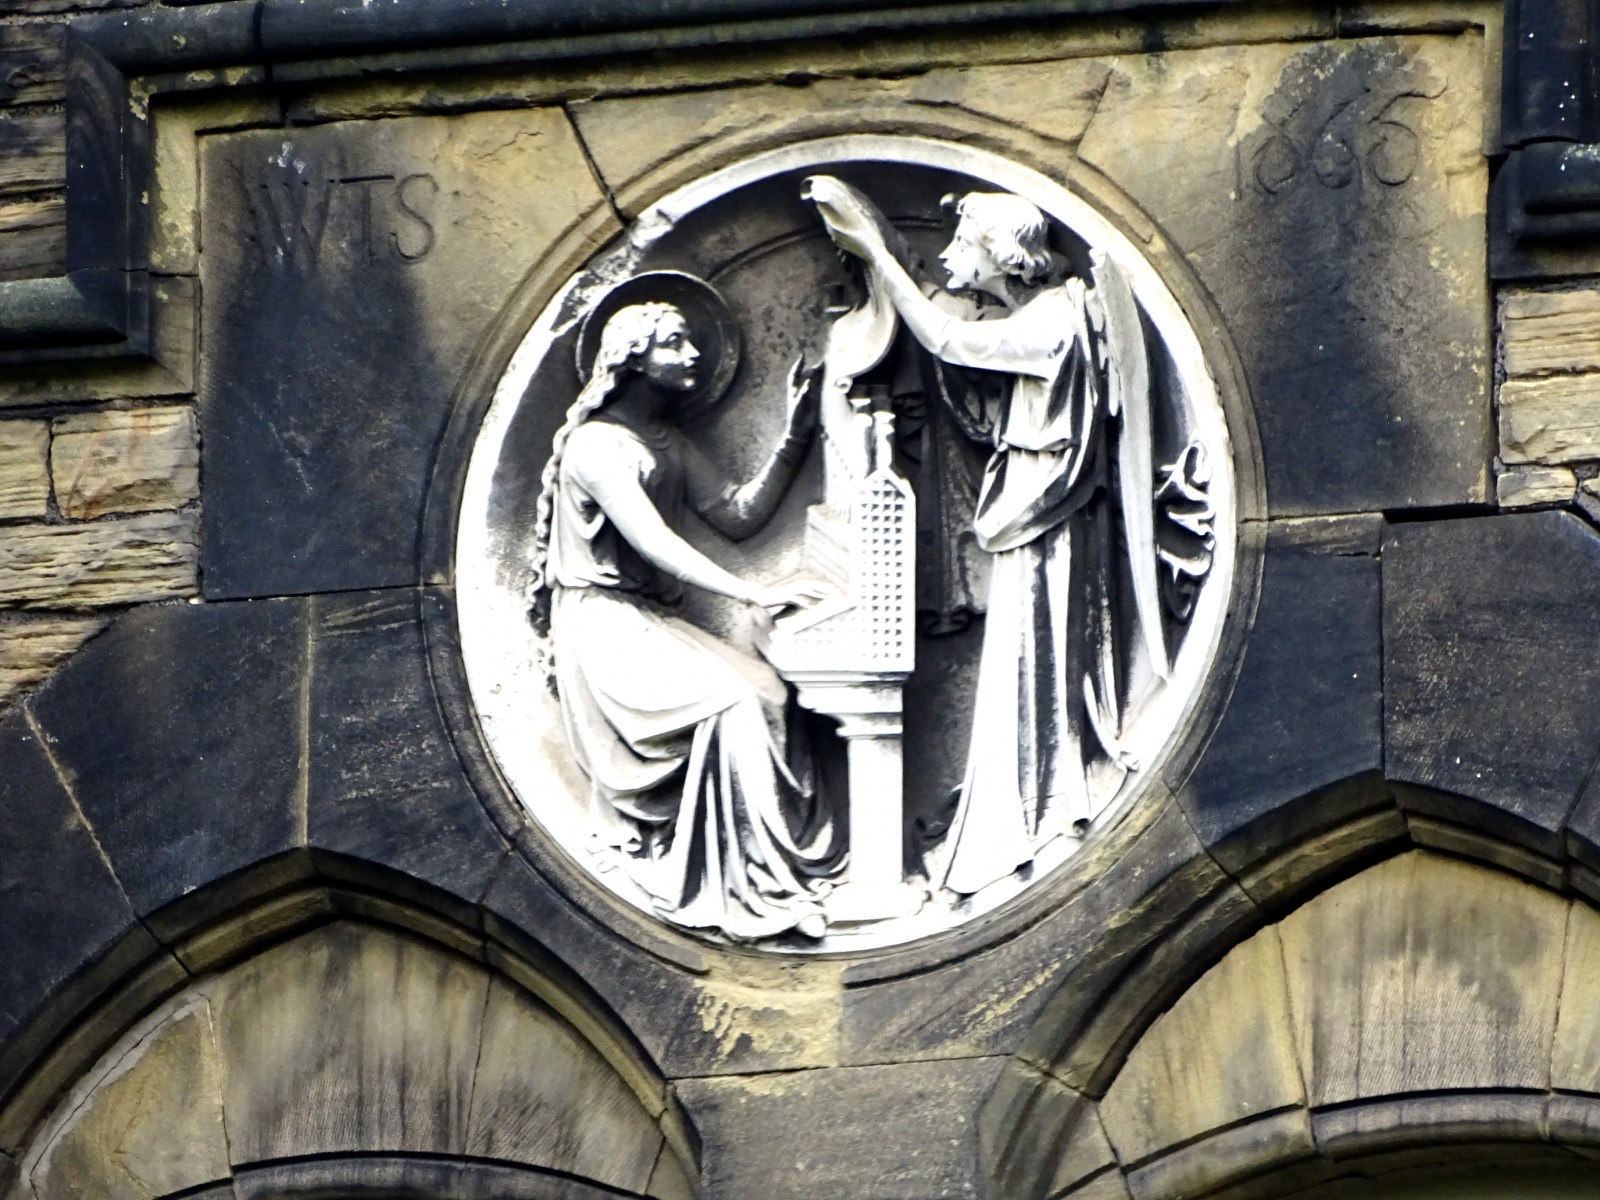 Music_Themed_Roundel_on_the_former_home_of_William_Turton_Stacey_Roundel_dated_1865.jpg